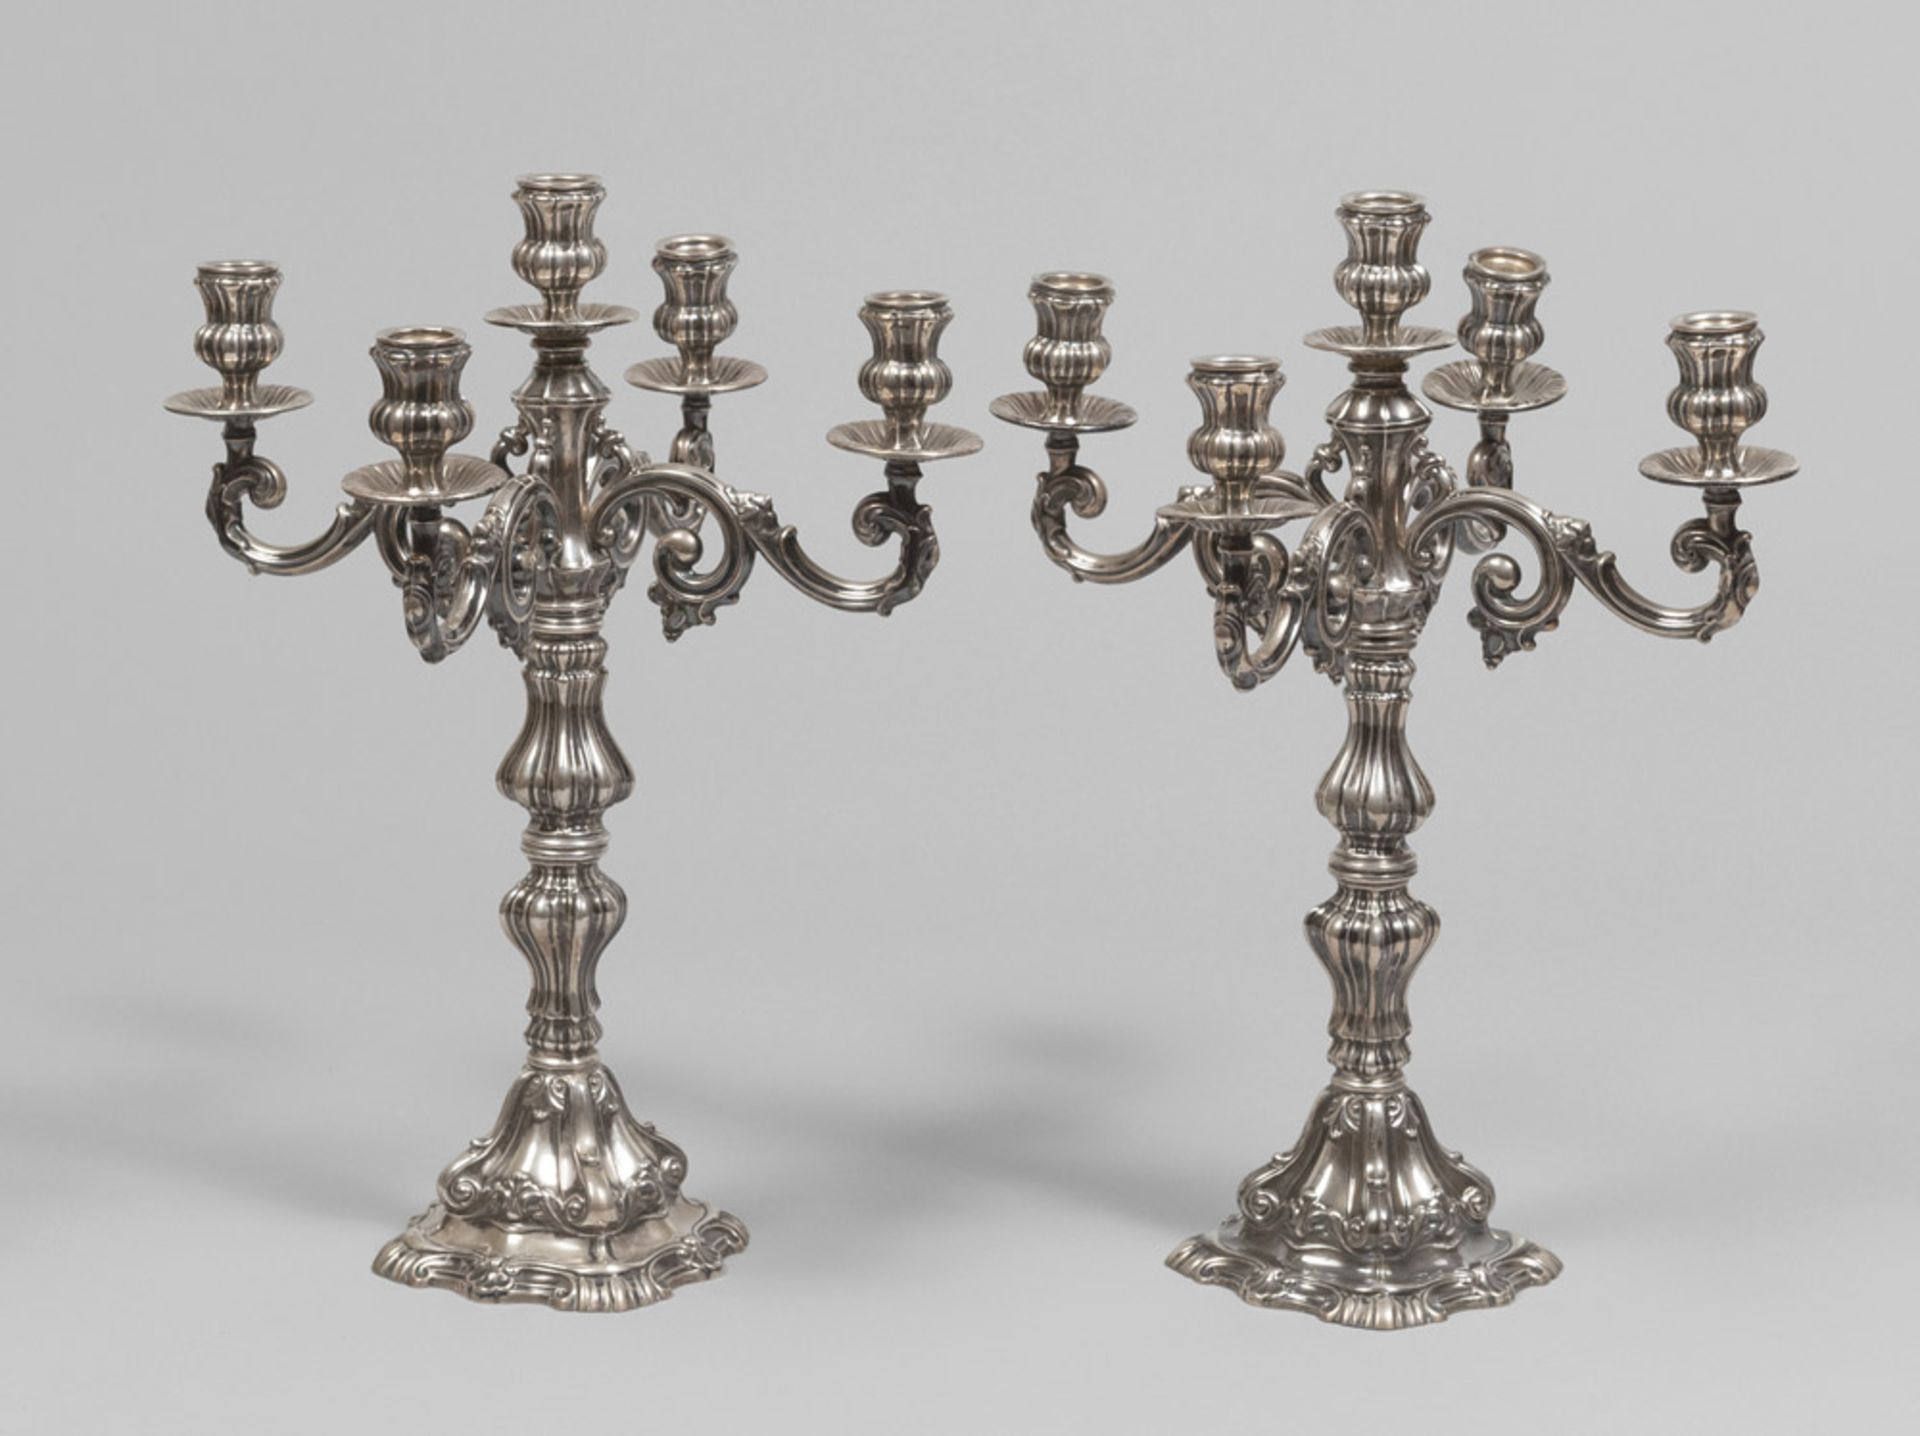 A pair of silver candelabra, early 20th century. Measurements cm. 44 x 33 x 33, gross weight gr.